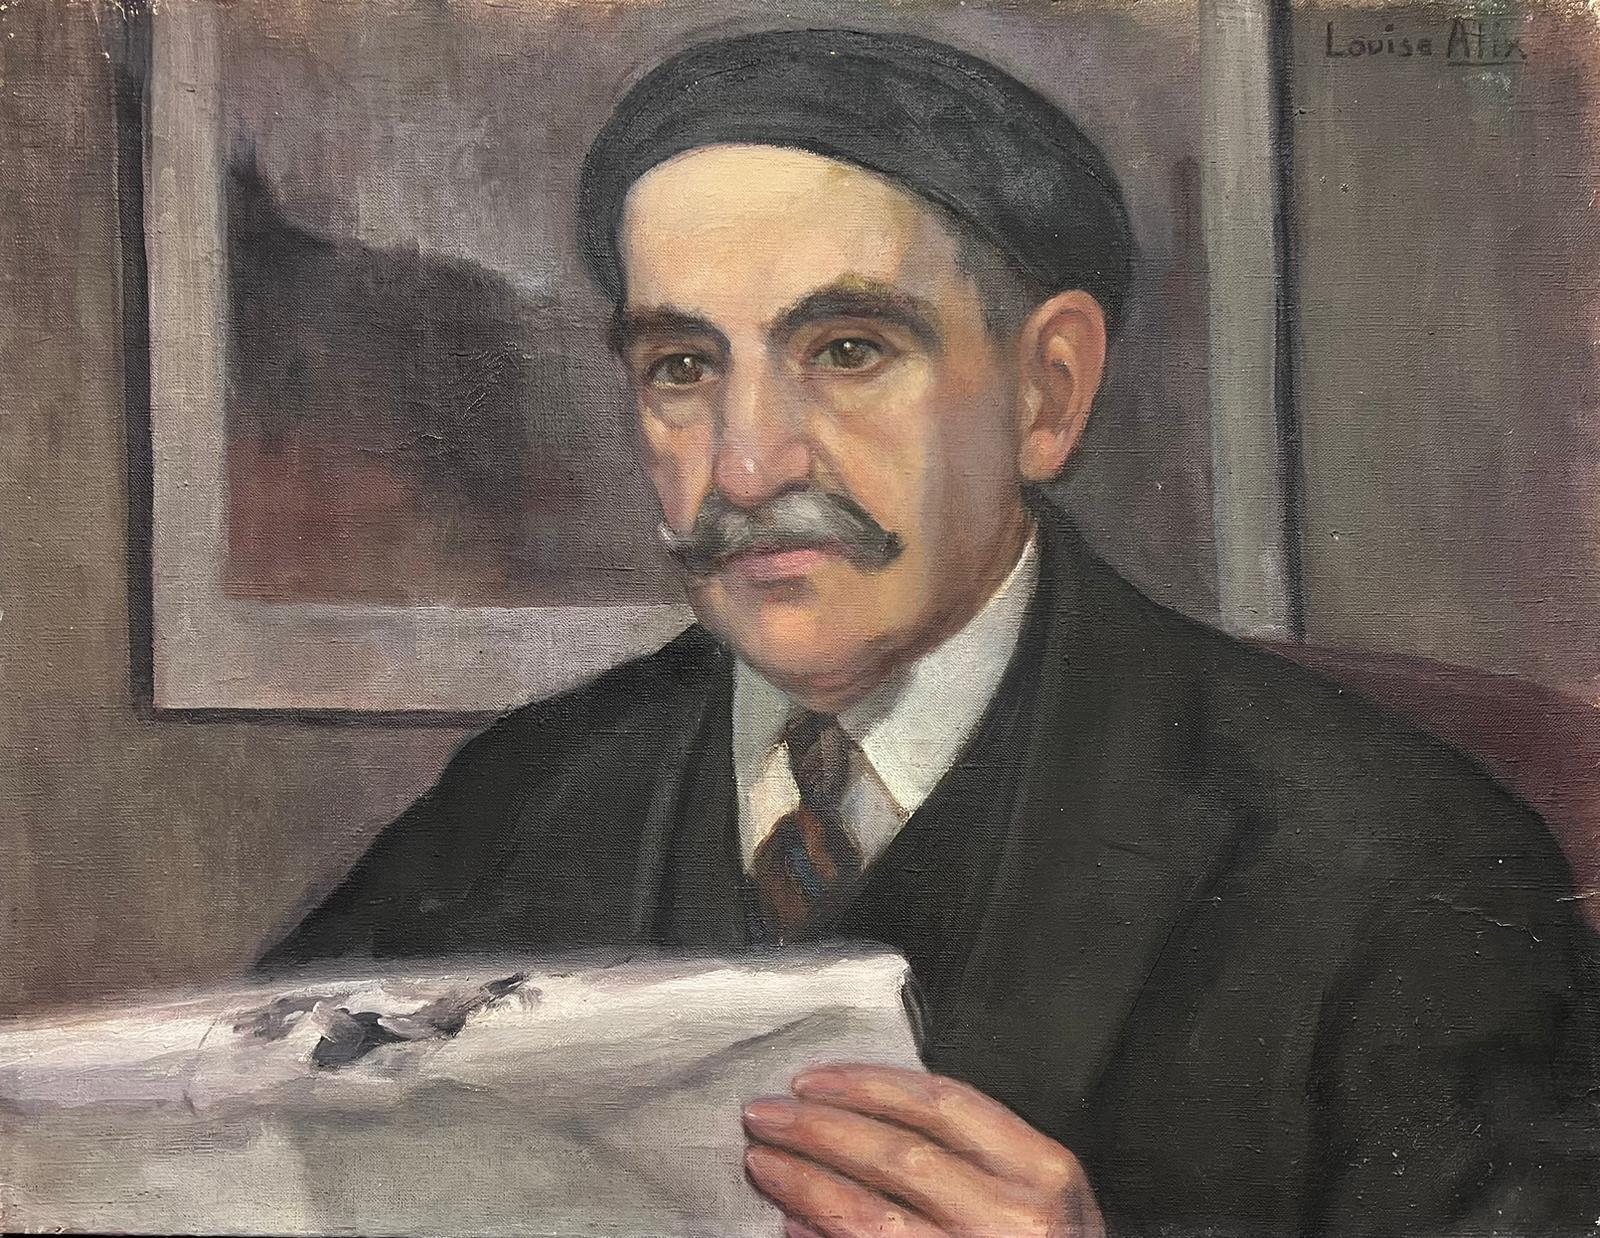 Louise Alix Figurative Painting - 1930's French Portrait Man with Moustache Reading Paper Signed Oil Painting